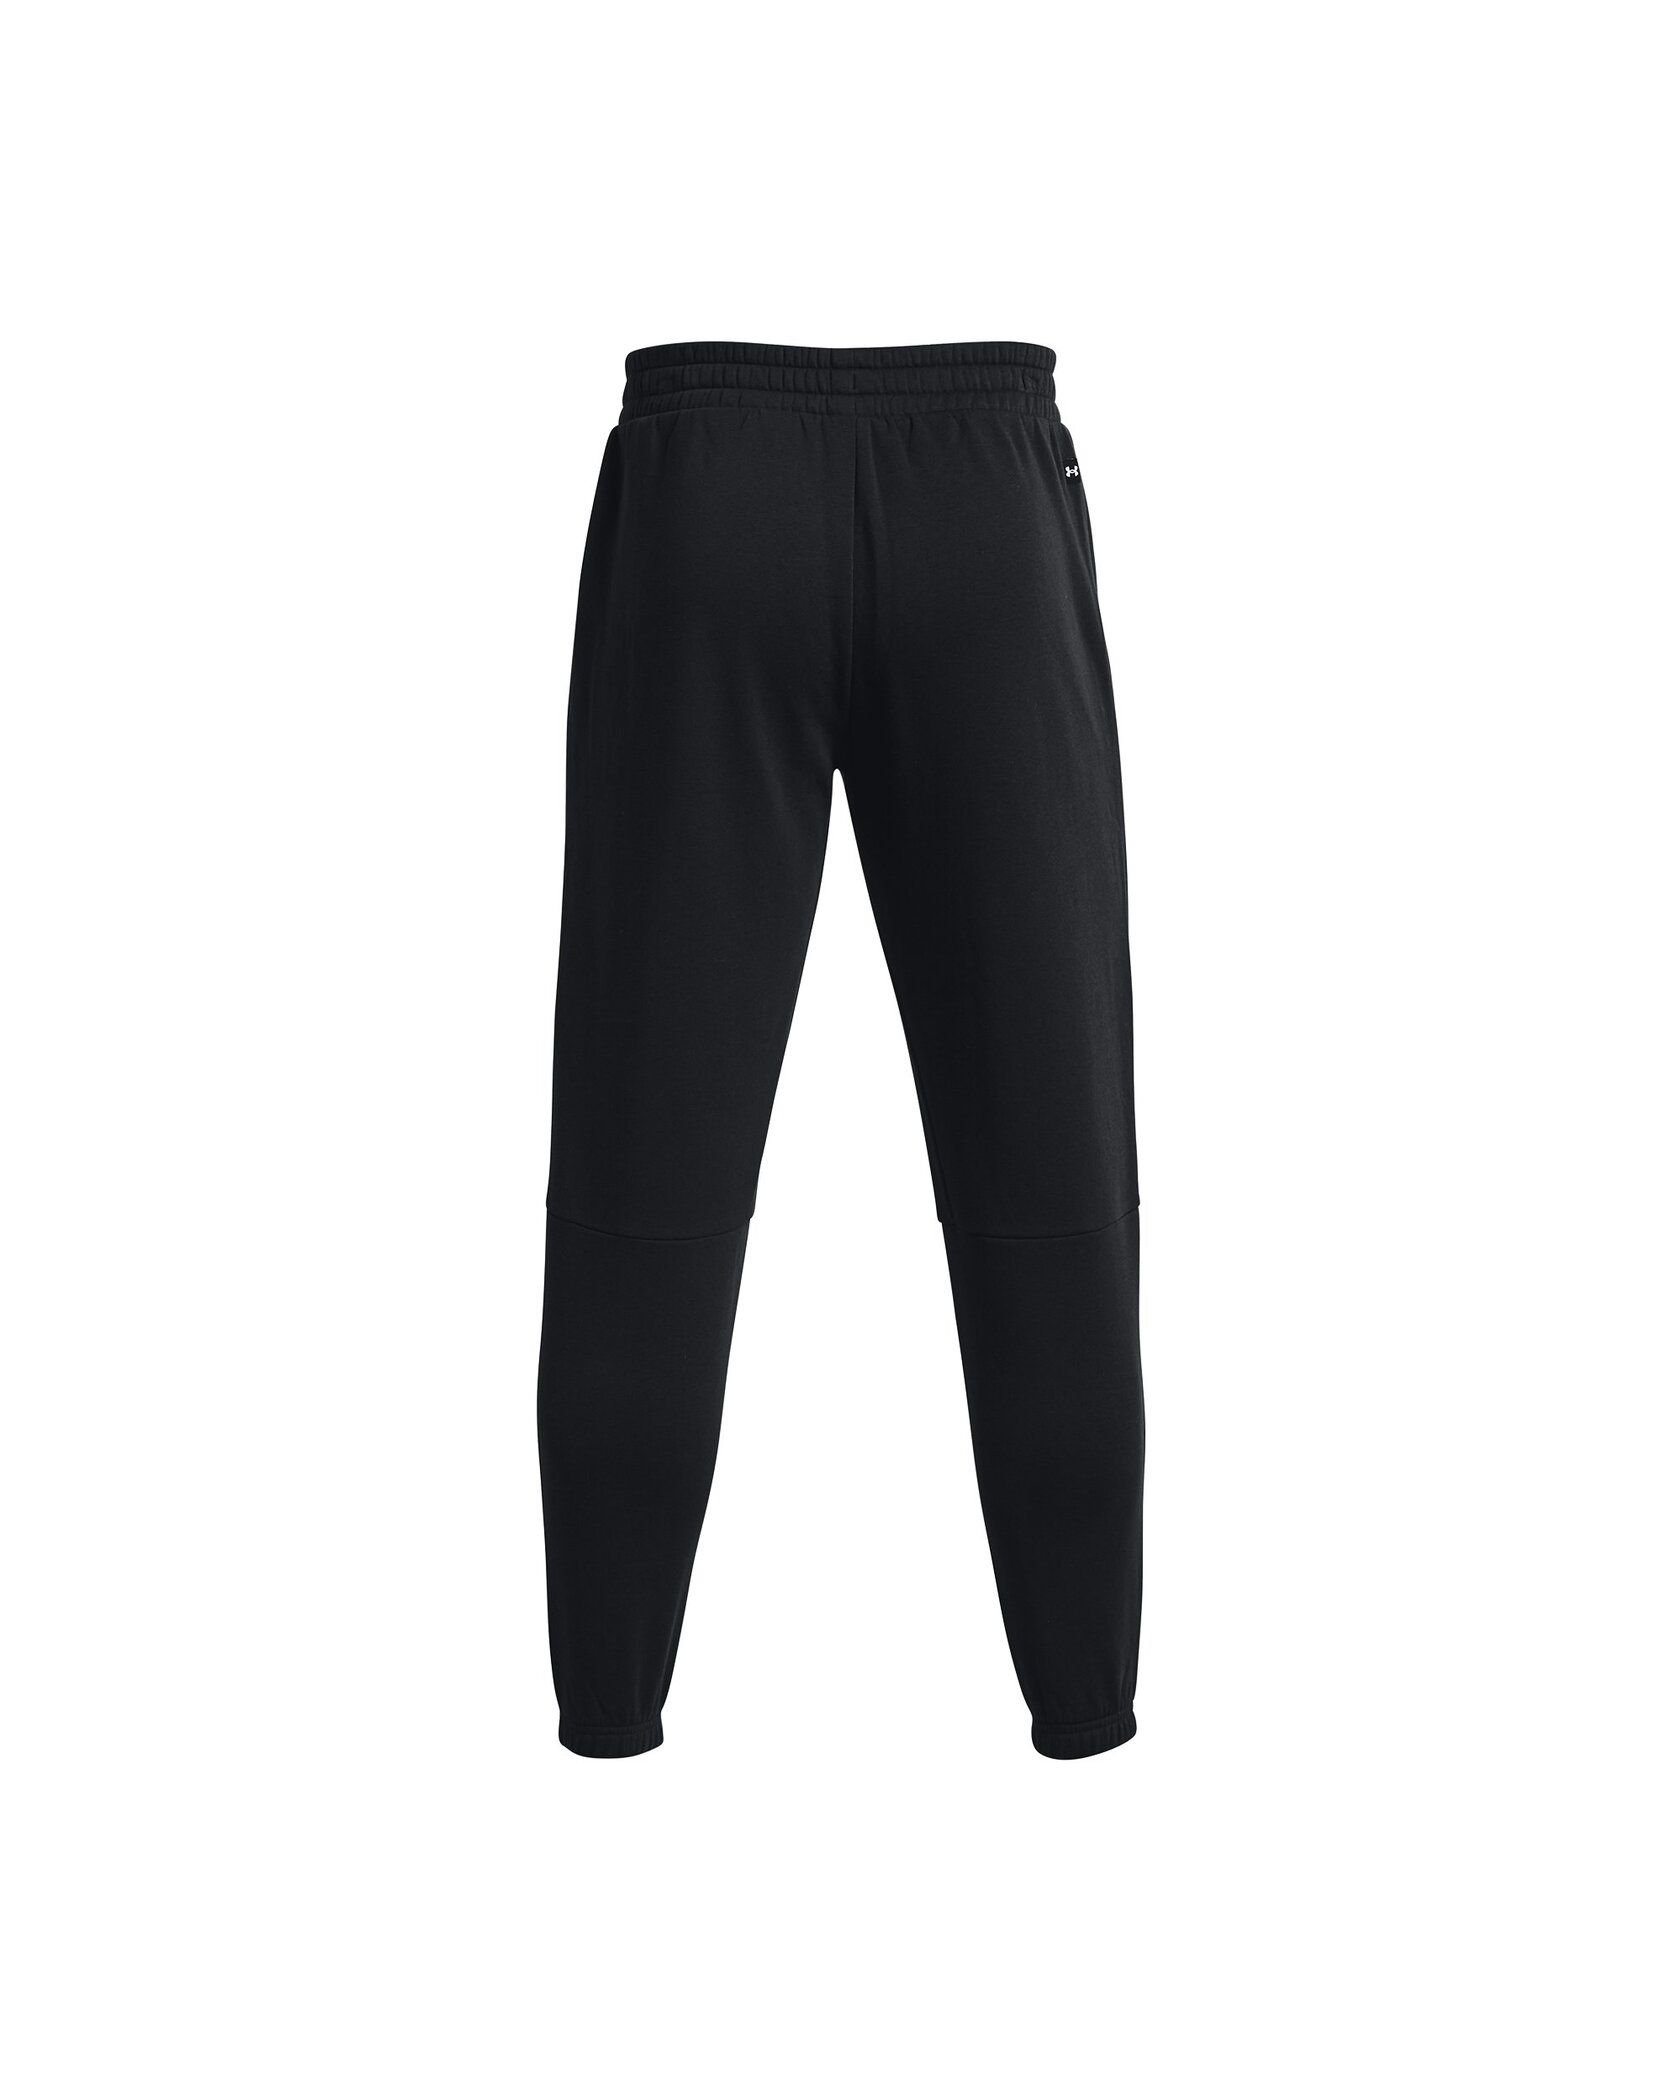 Order Online UA Project Rock Rival Fleece Joggers From Under